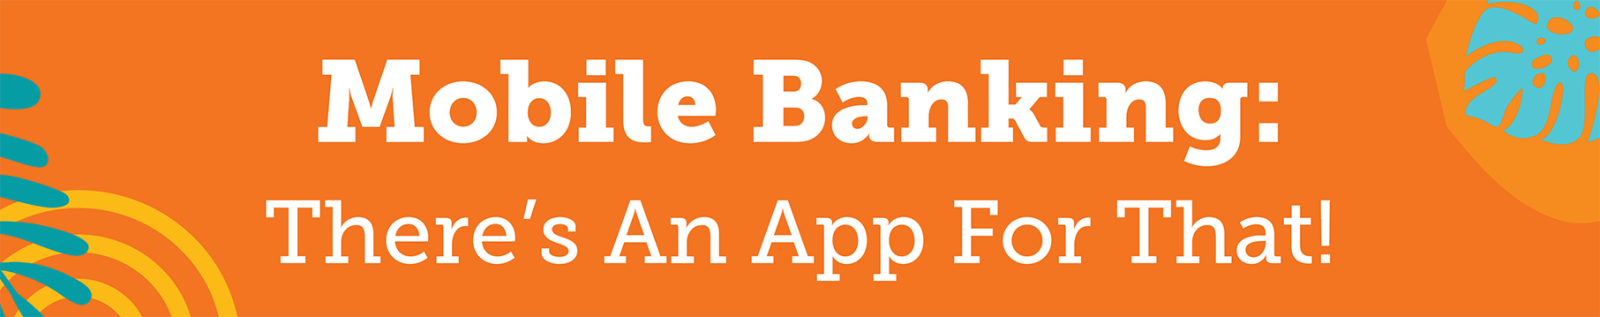 Mobile Banking: There's An App For That!